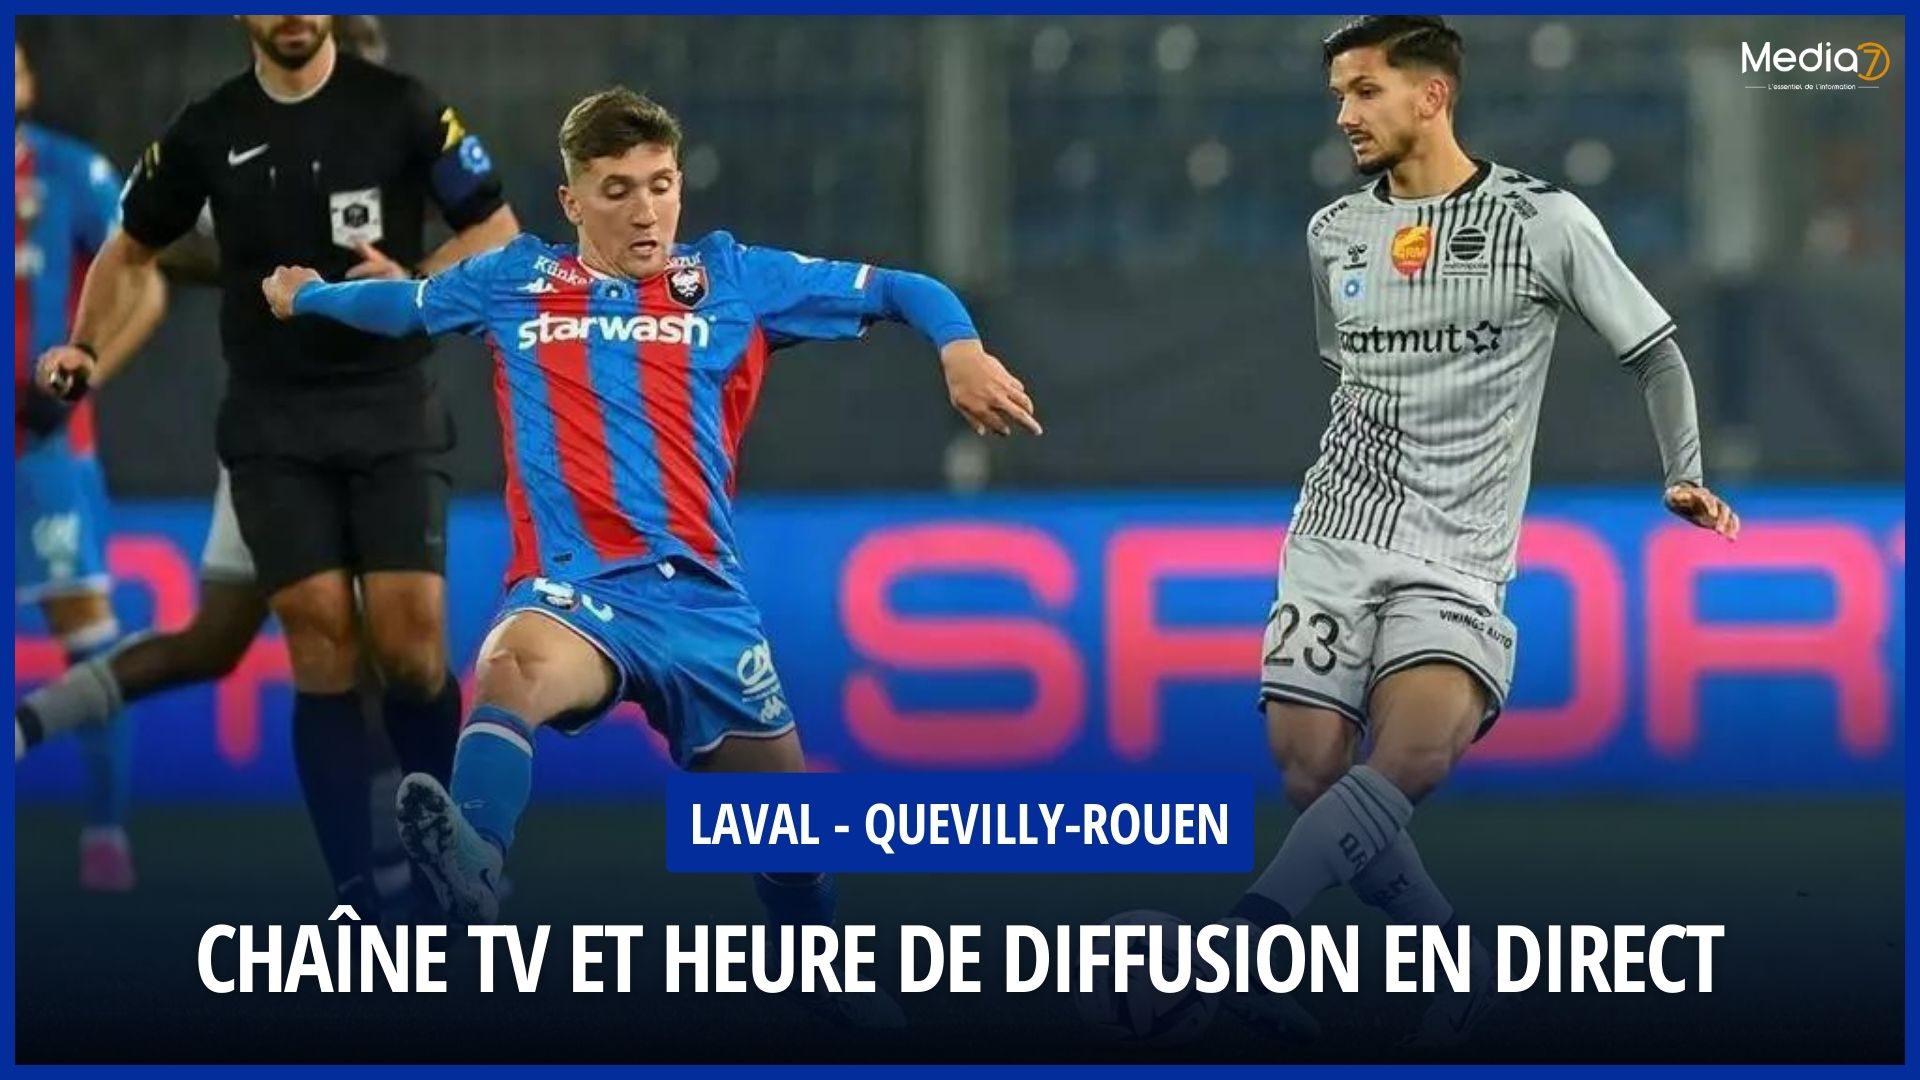 Live Broadcast: Laval - Quevilly-Rouen: On which TV & Streaming Channels? At what time? - Media7